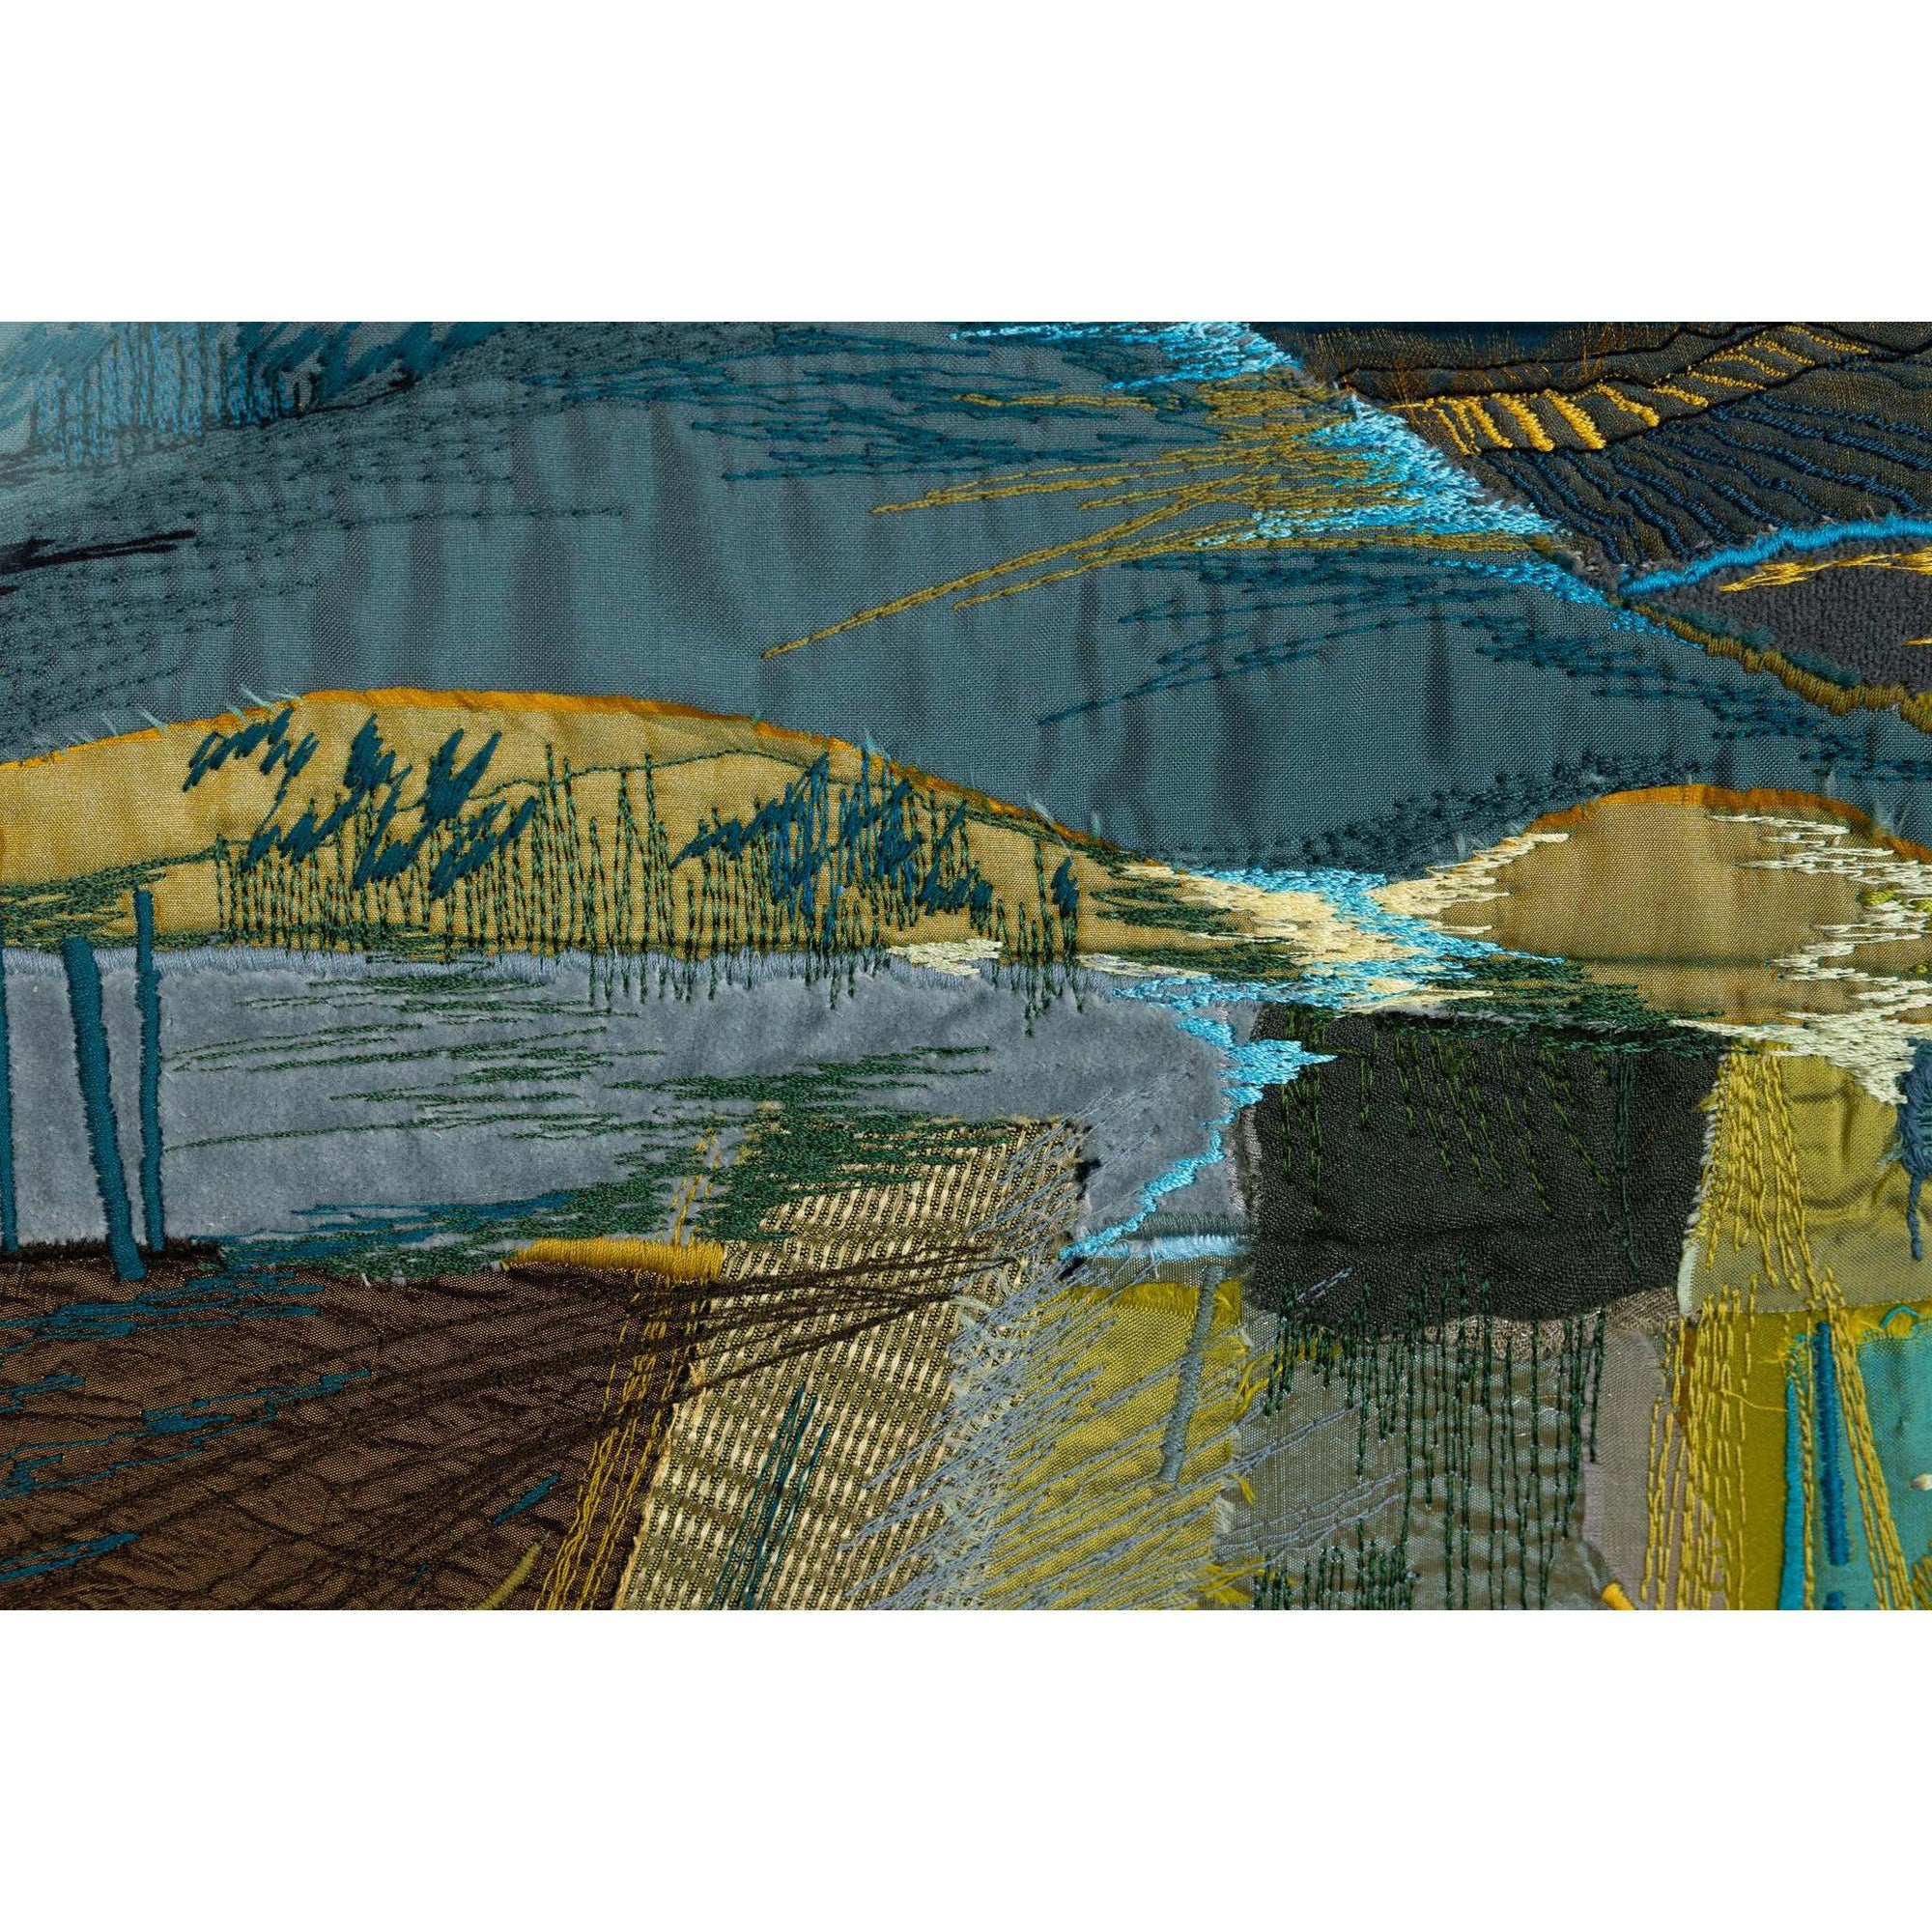 'Fields and Hills' dynamic stitched textiles by Sarah Pooley, available at Padstow Gallery, Cornwall